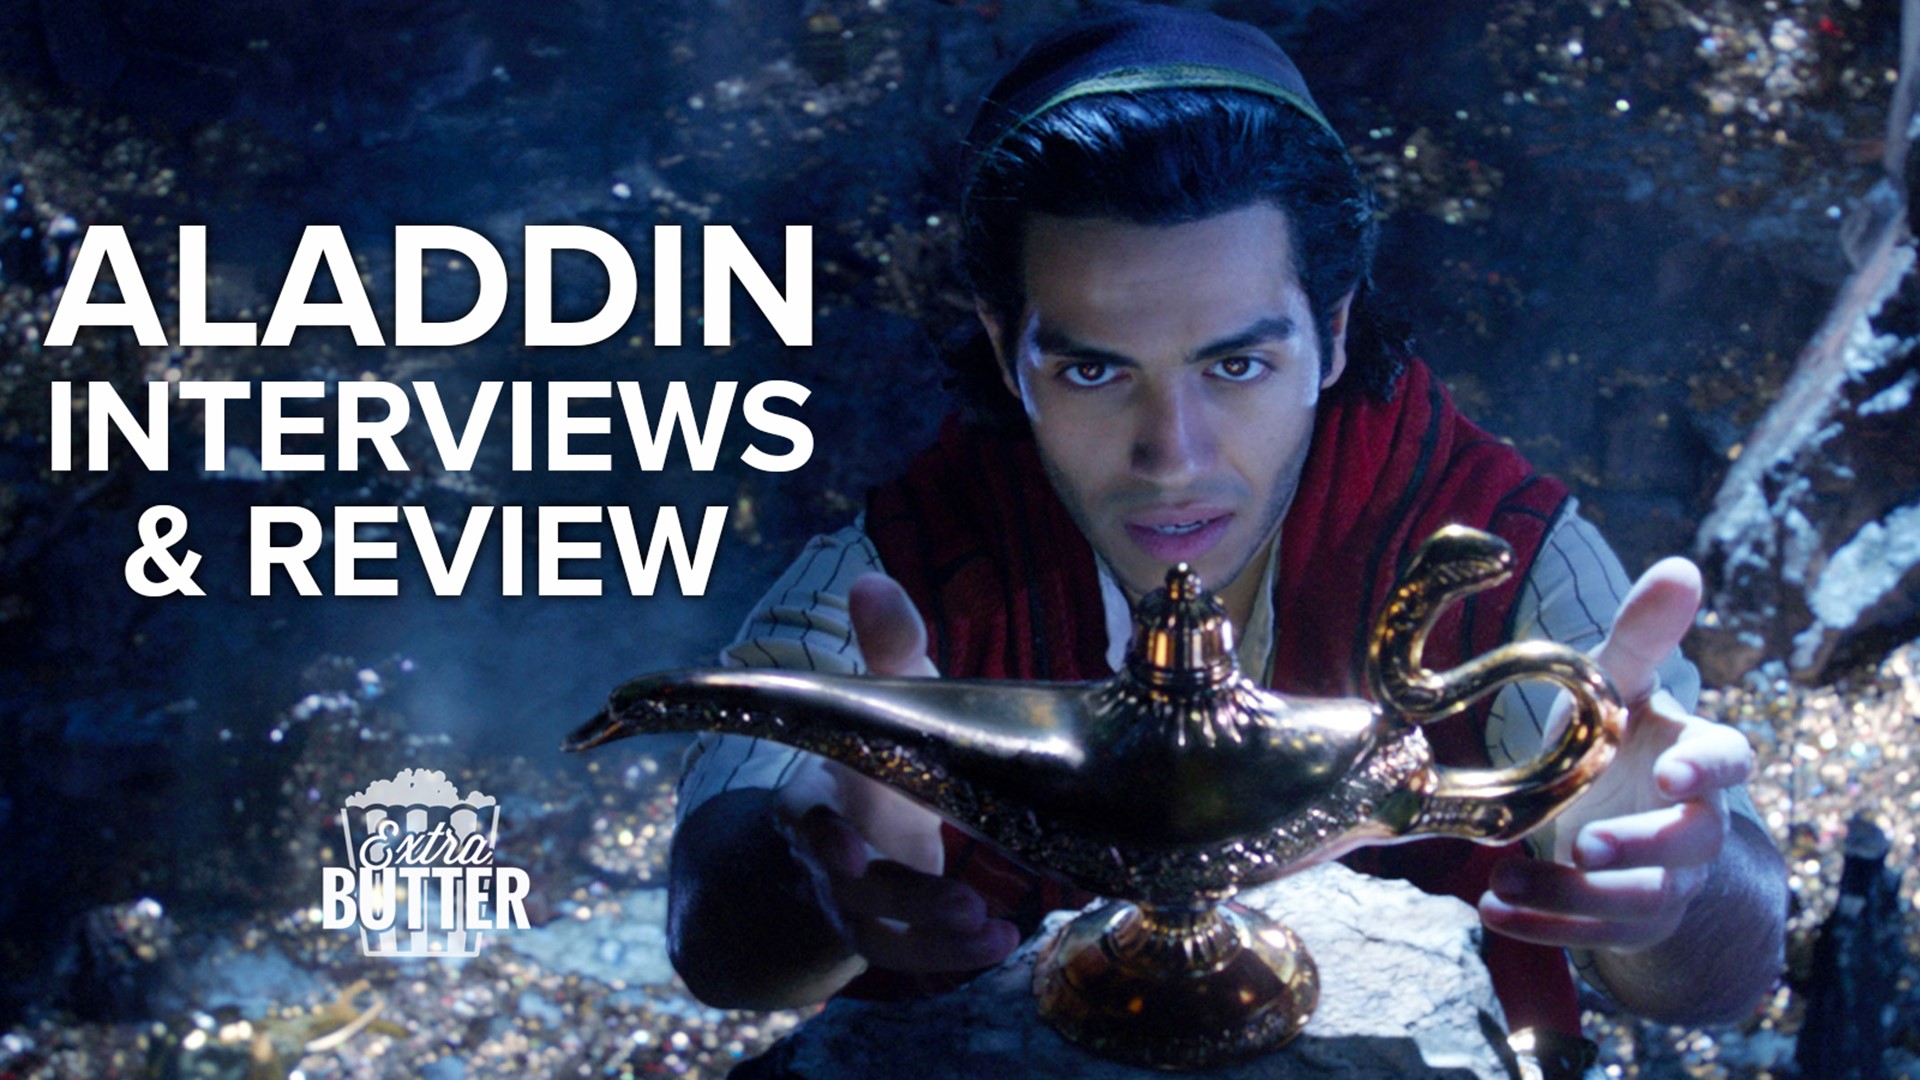 Hear from the stars of the new live-action remake of 'Aladdin.' Mena Massoud talks about becoming Aladdin and Will Smith opens up about the Genie role after Robin Williams.